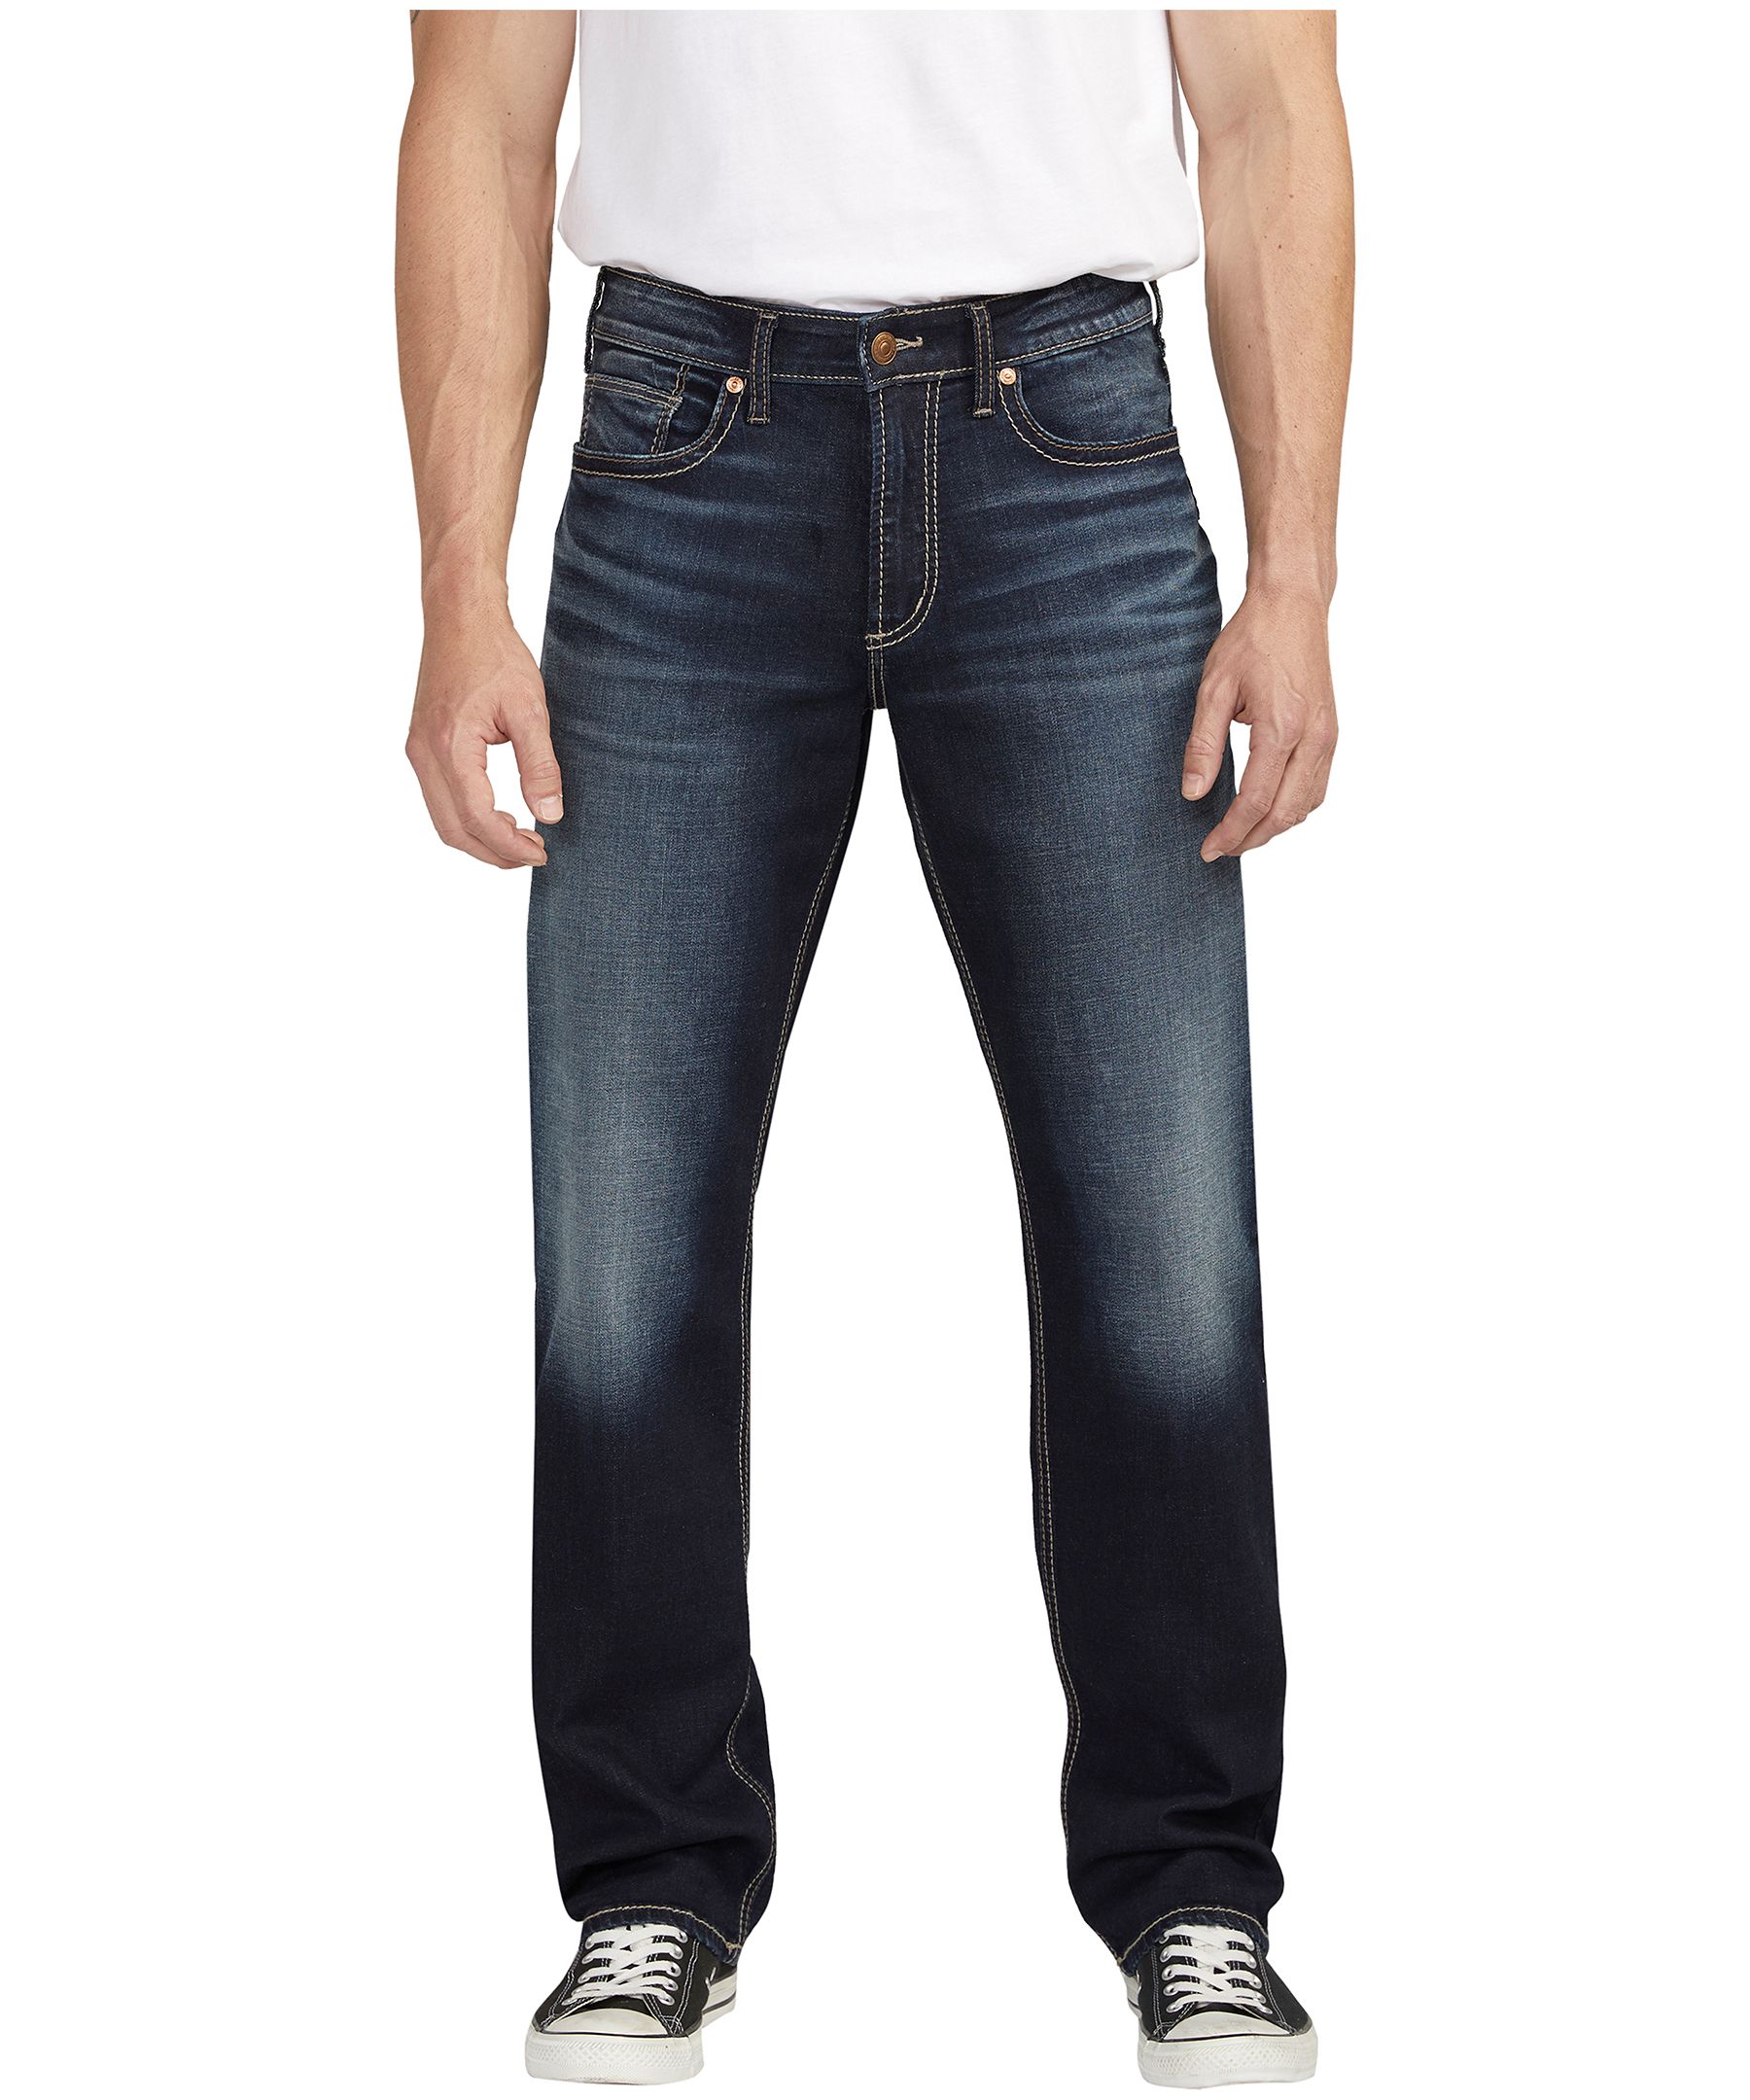 Silver Men's Hunter Relaxed Athletic Fit Straight Leg Jeans